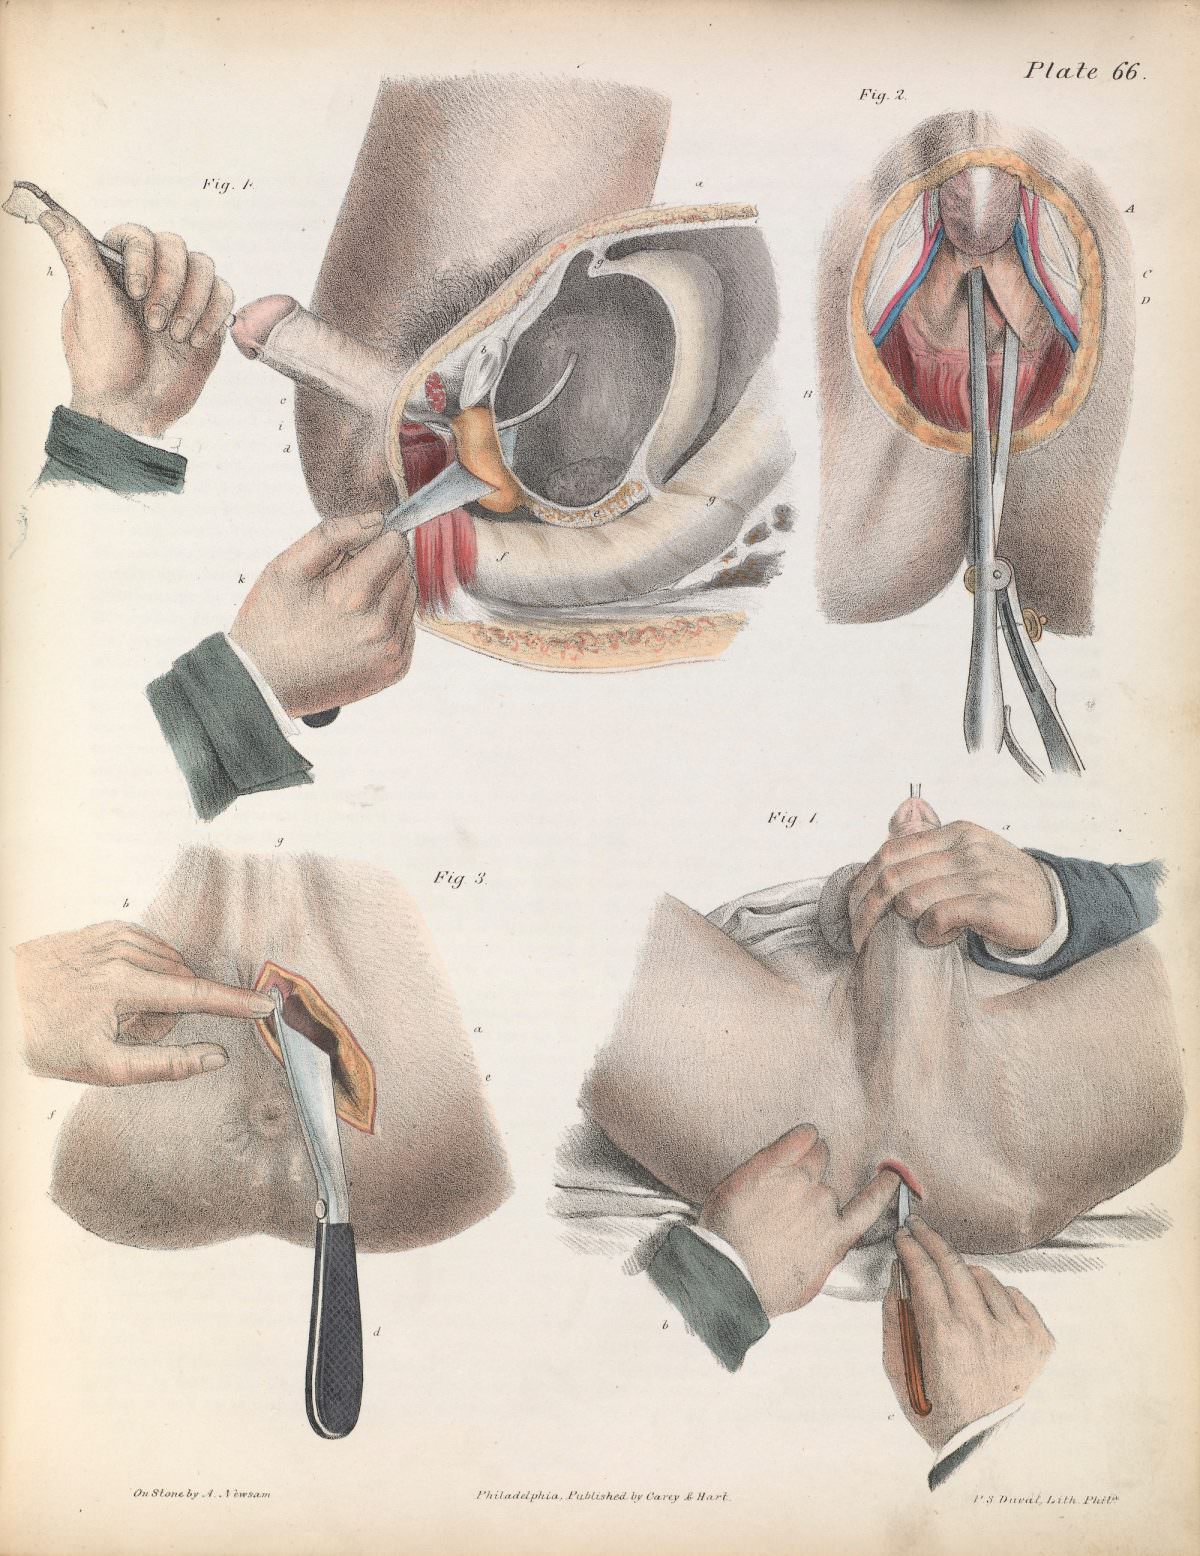 Plate LXVI. Surgical technique for lithotomy.